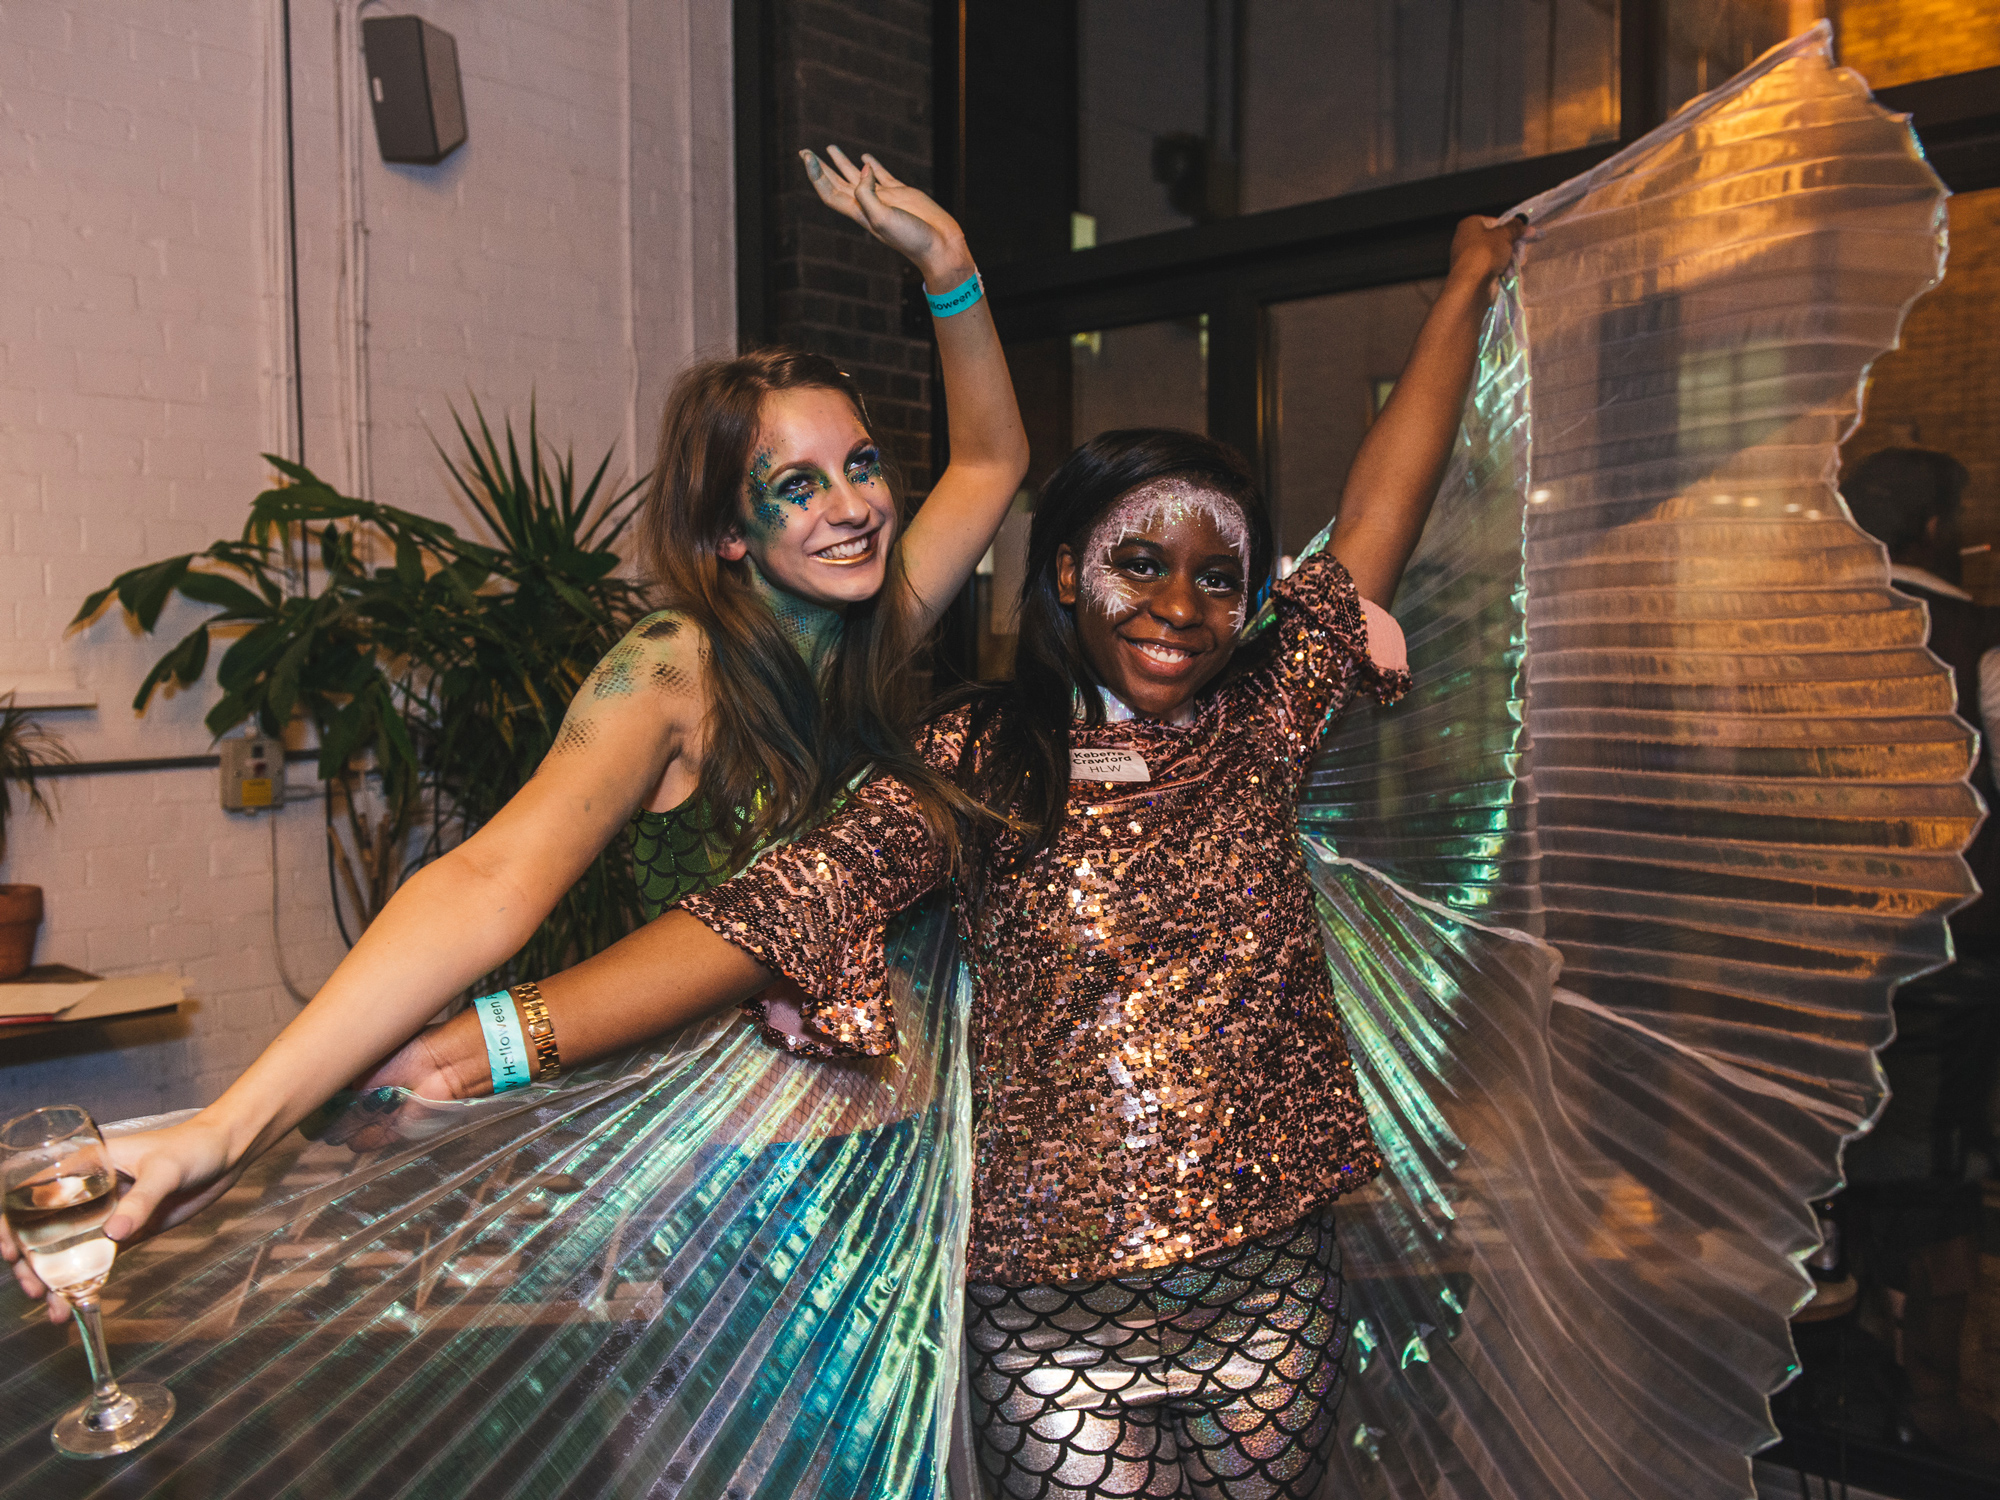 Two individuals in mermaid-inspired costumes with one sporting large, iridescent wings, at a lively costume event.